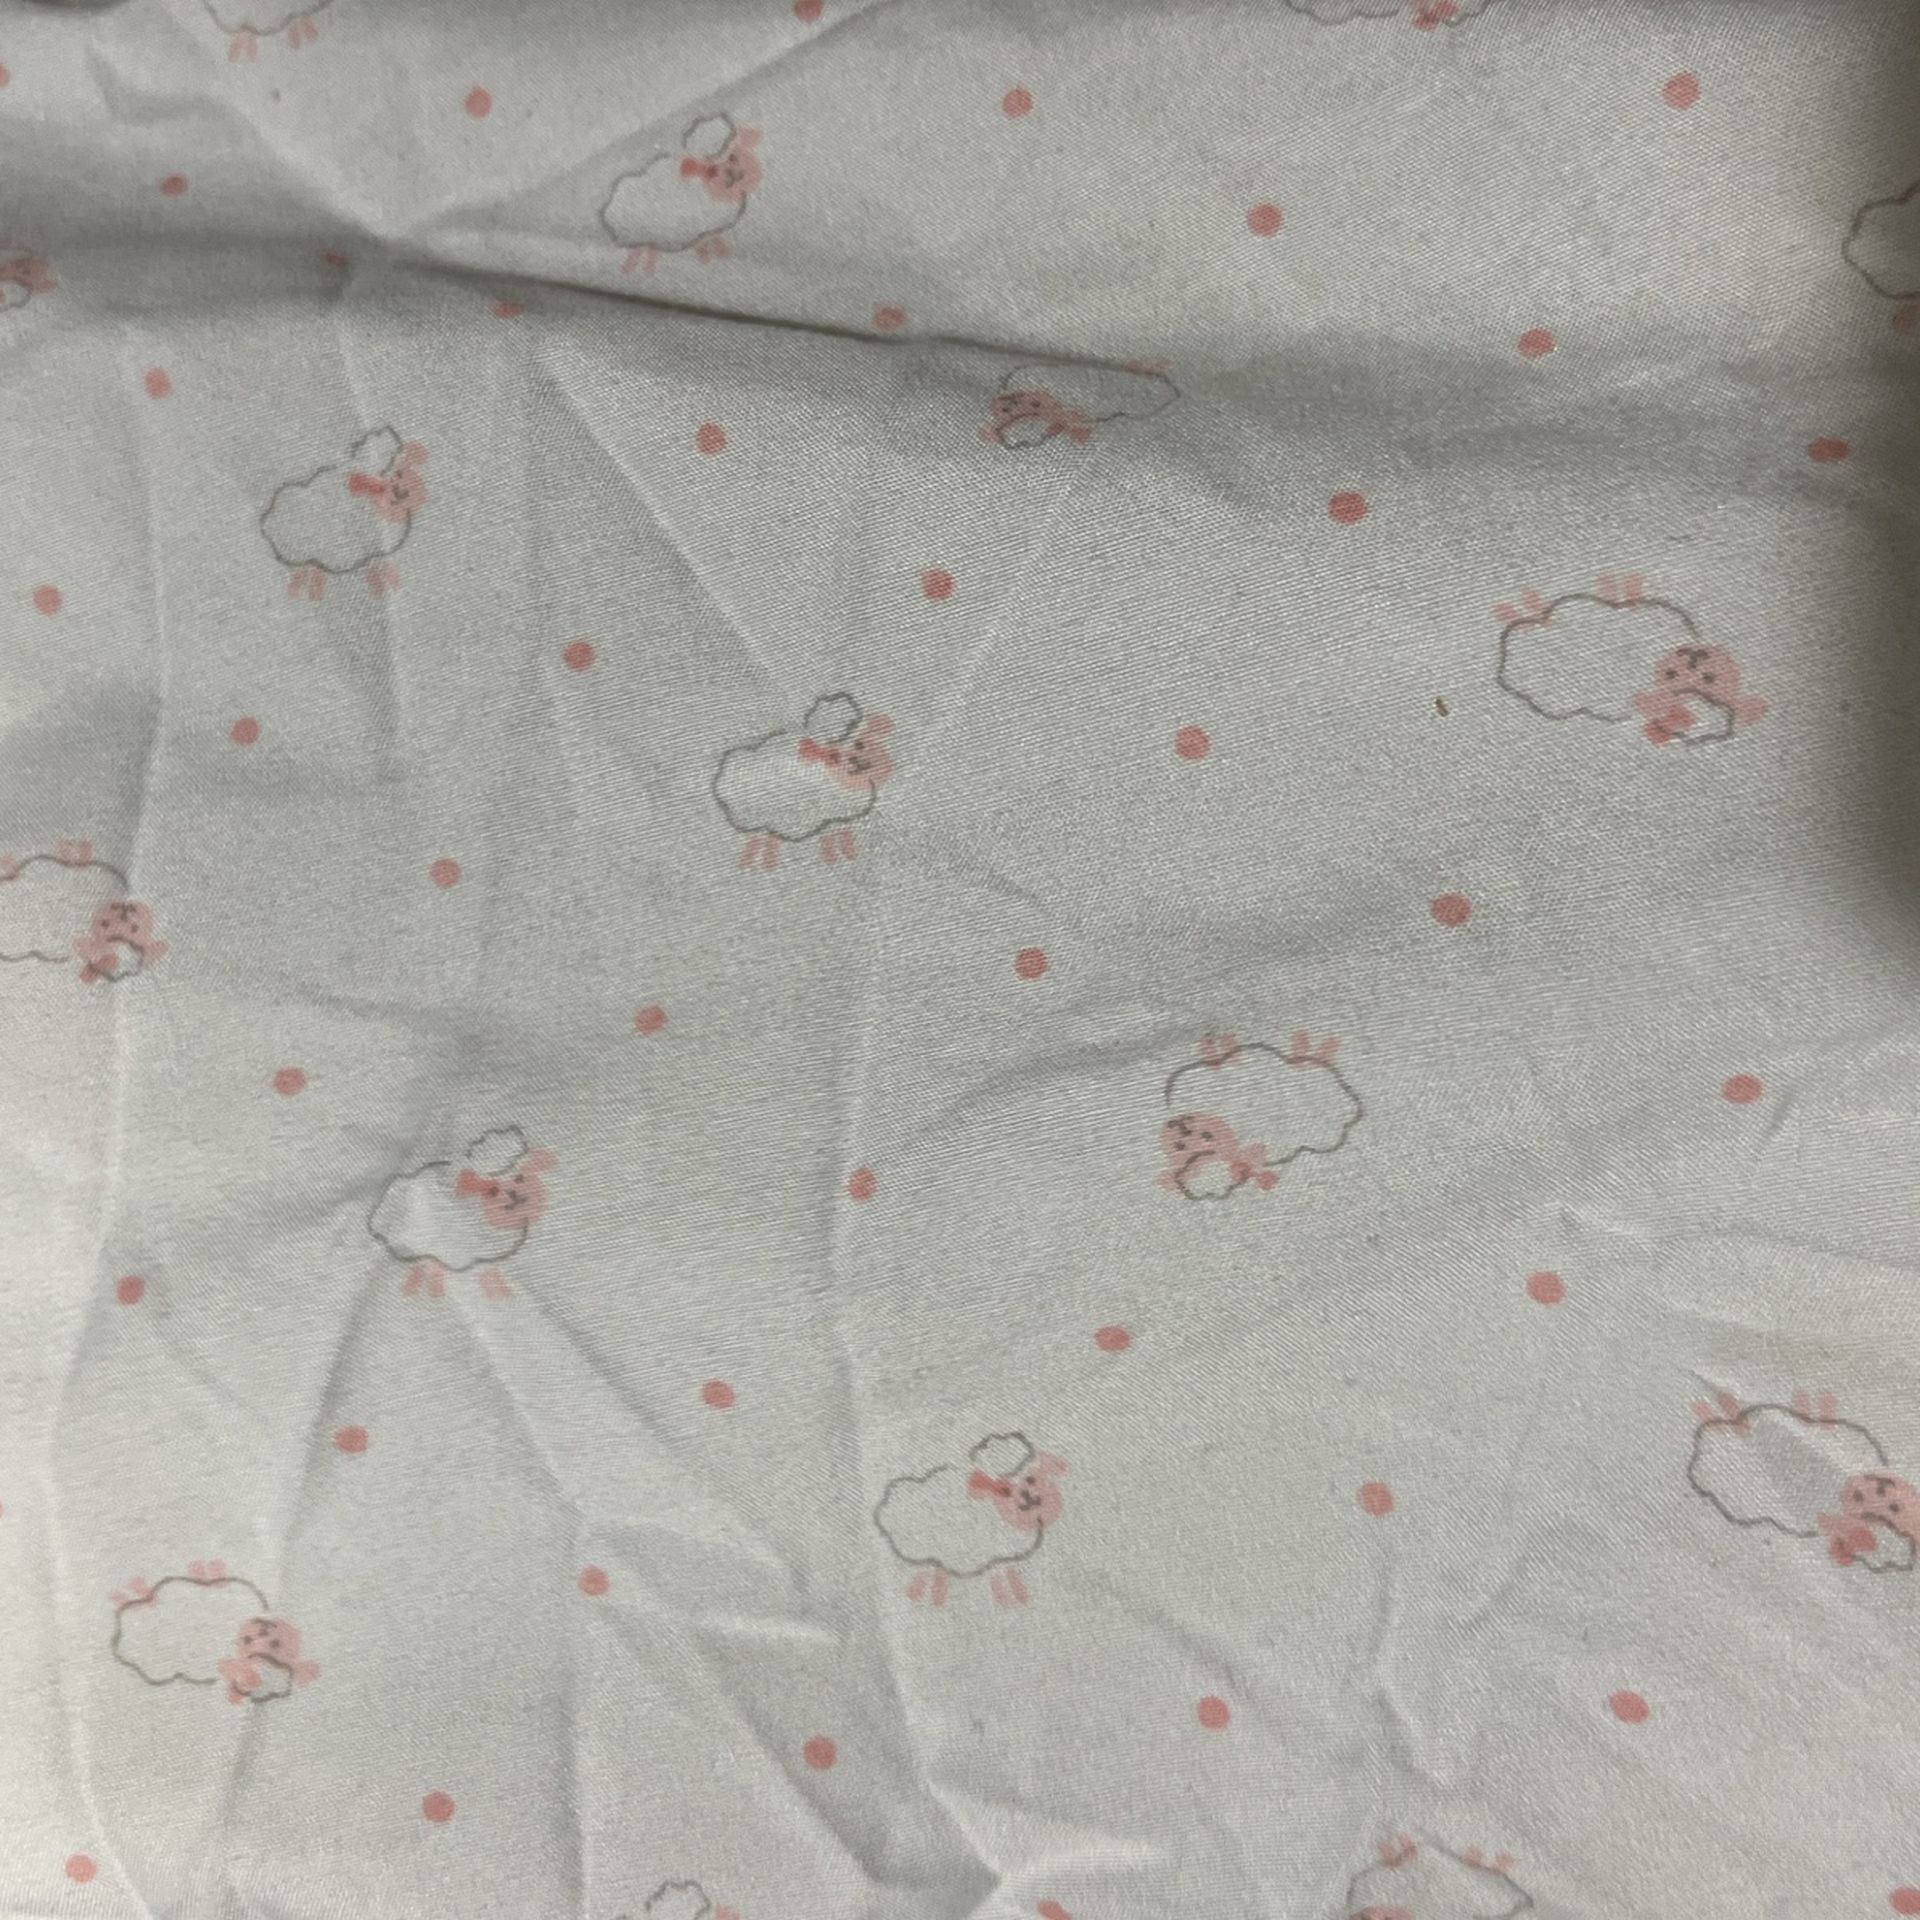 Baby sheets For Crib